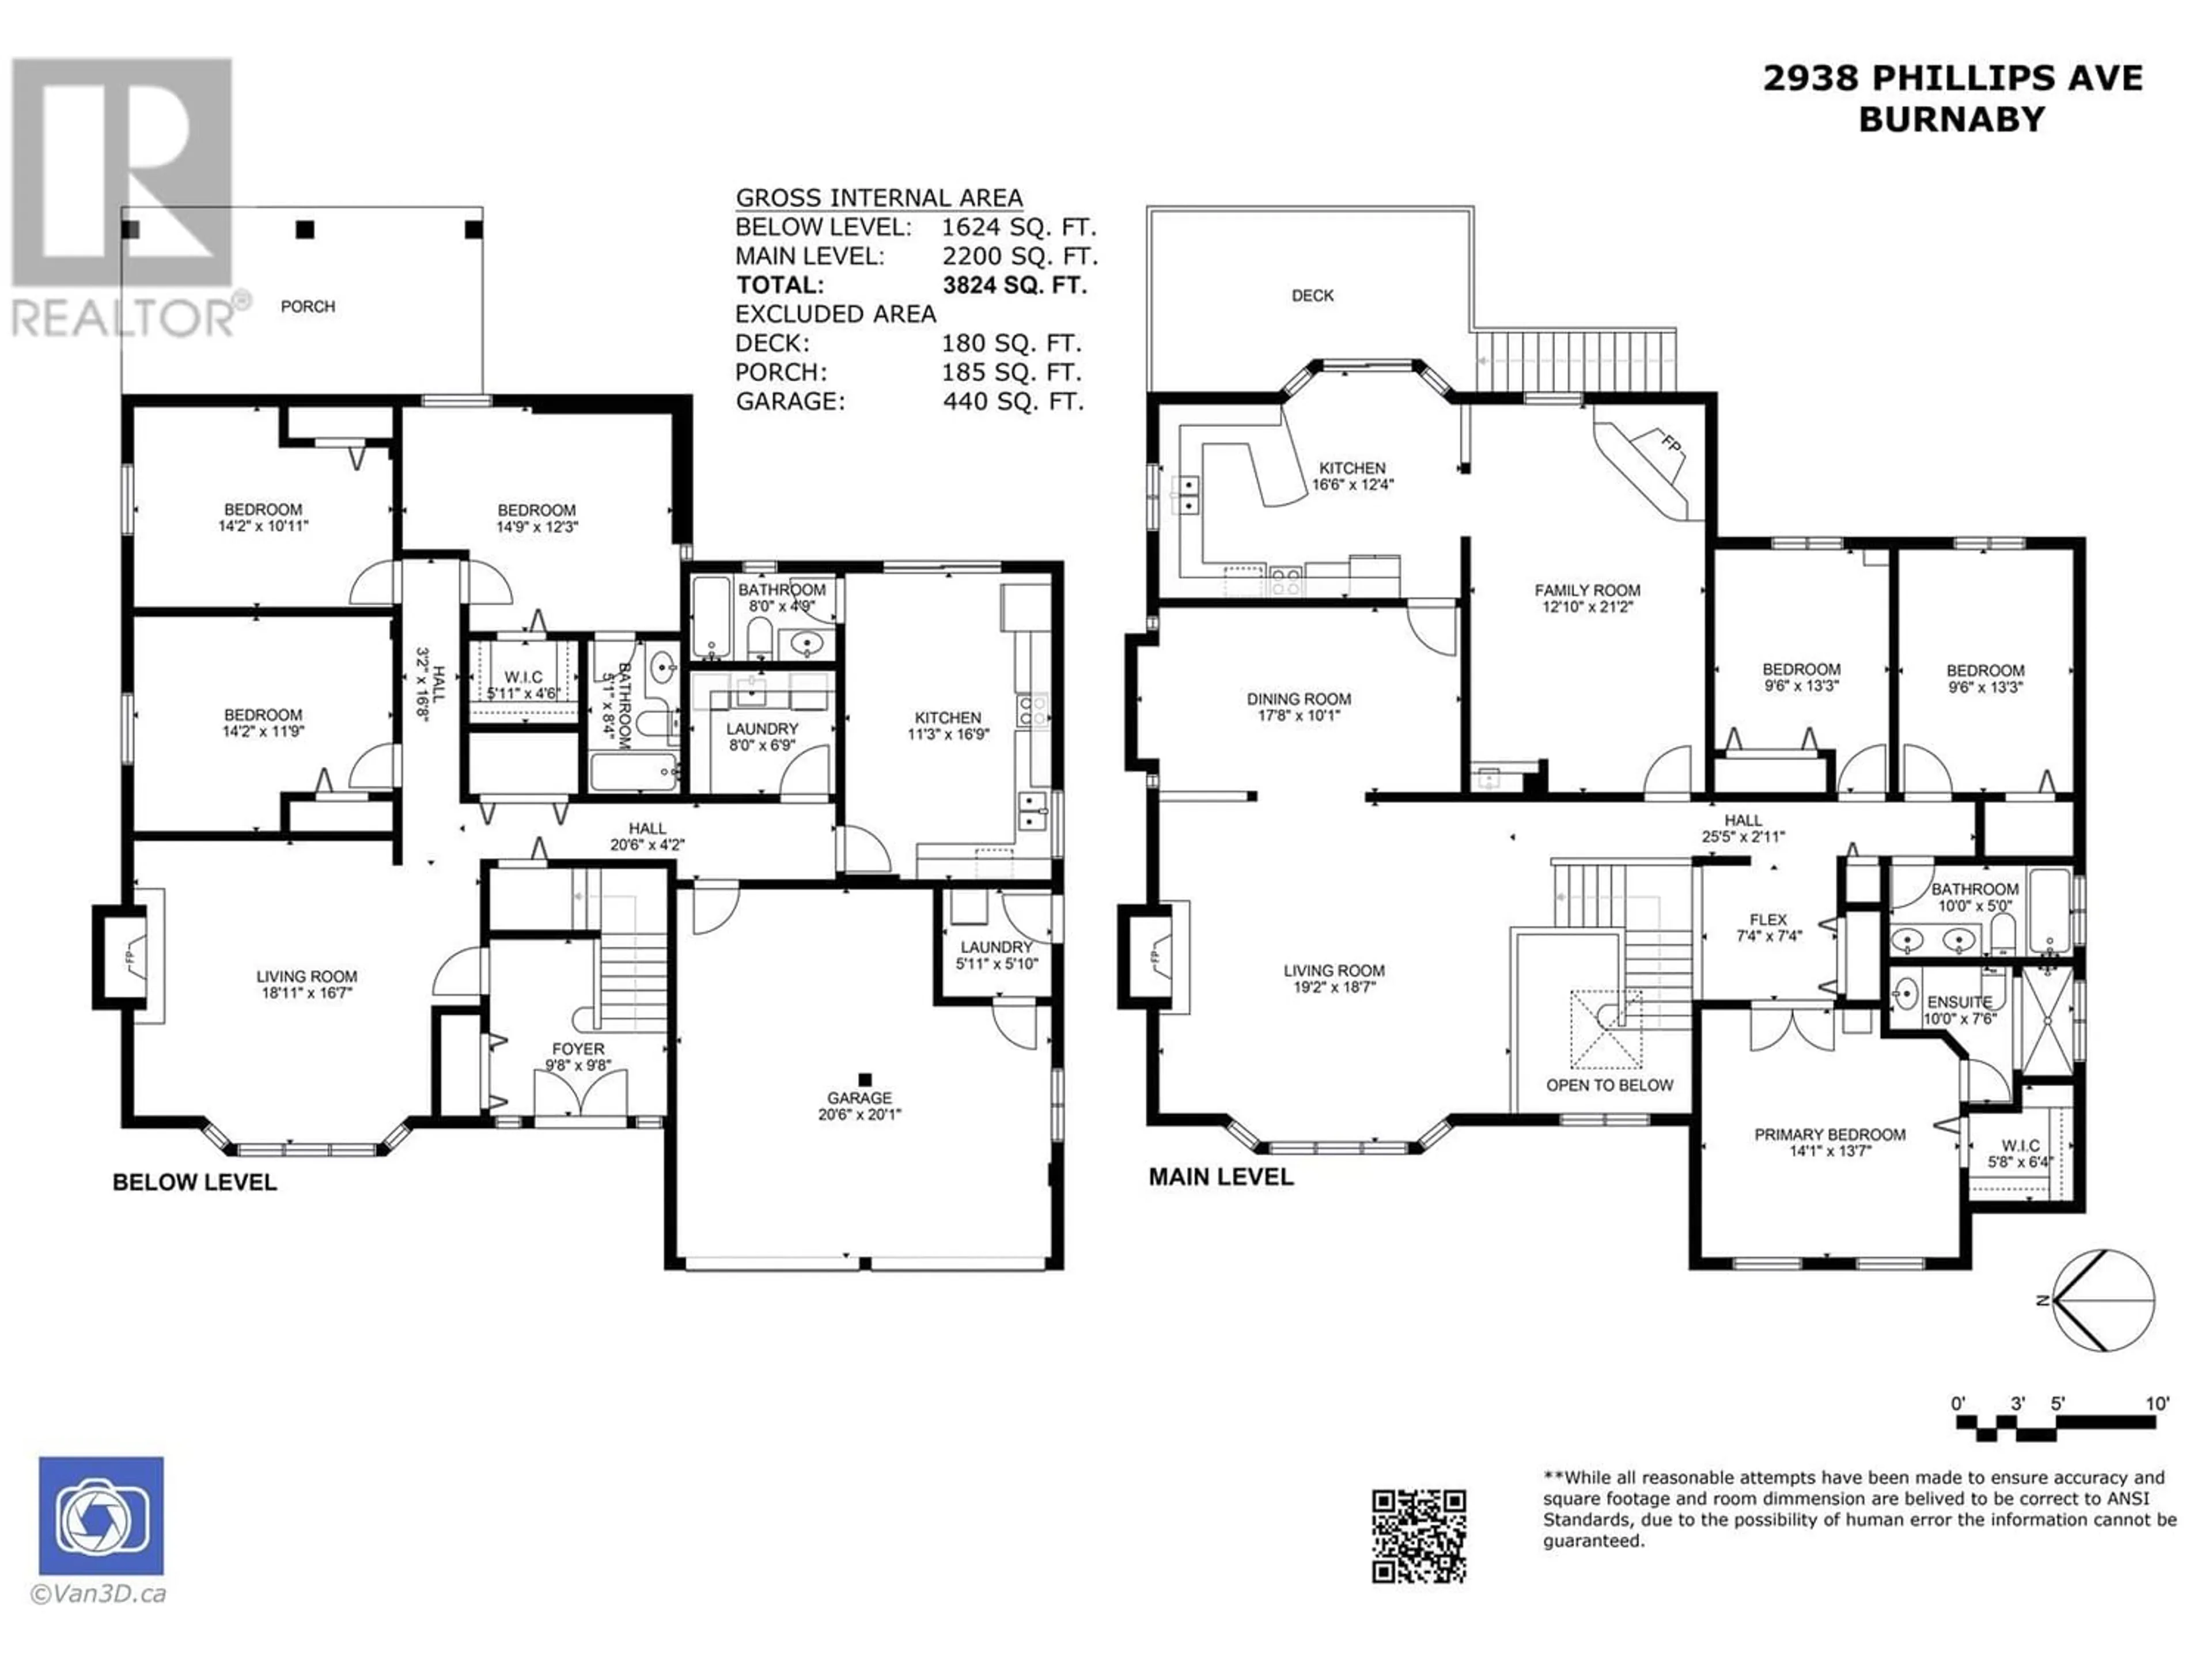 Floor plan for 2938 PHILLIPS AVENUE, Burnaby British Columbia V5A2W5